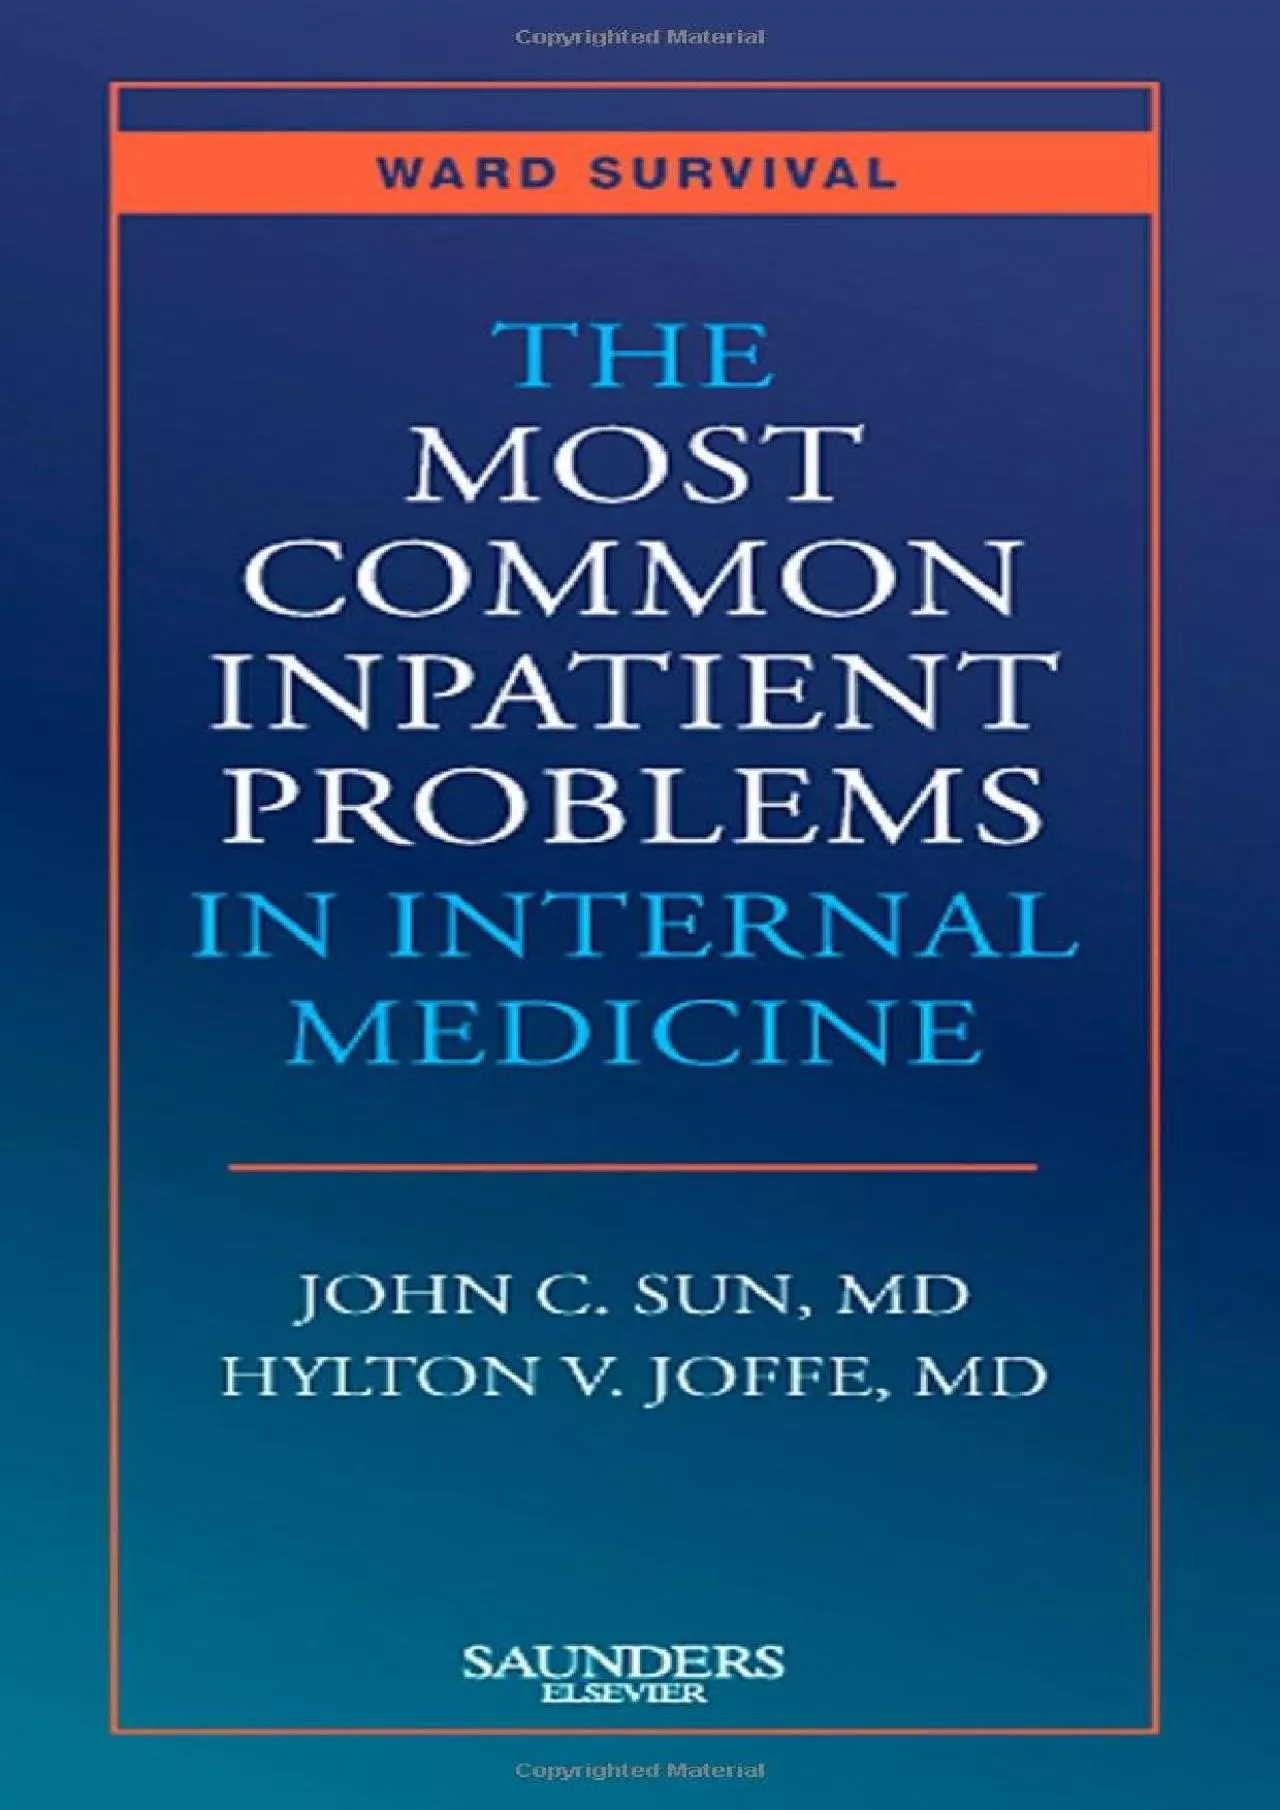 (EBOOK)-The Most Common Inpatient Problems in Internal Medicine: Ward Survival